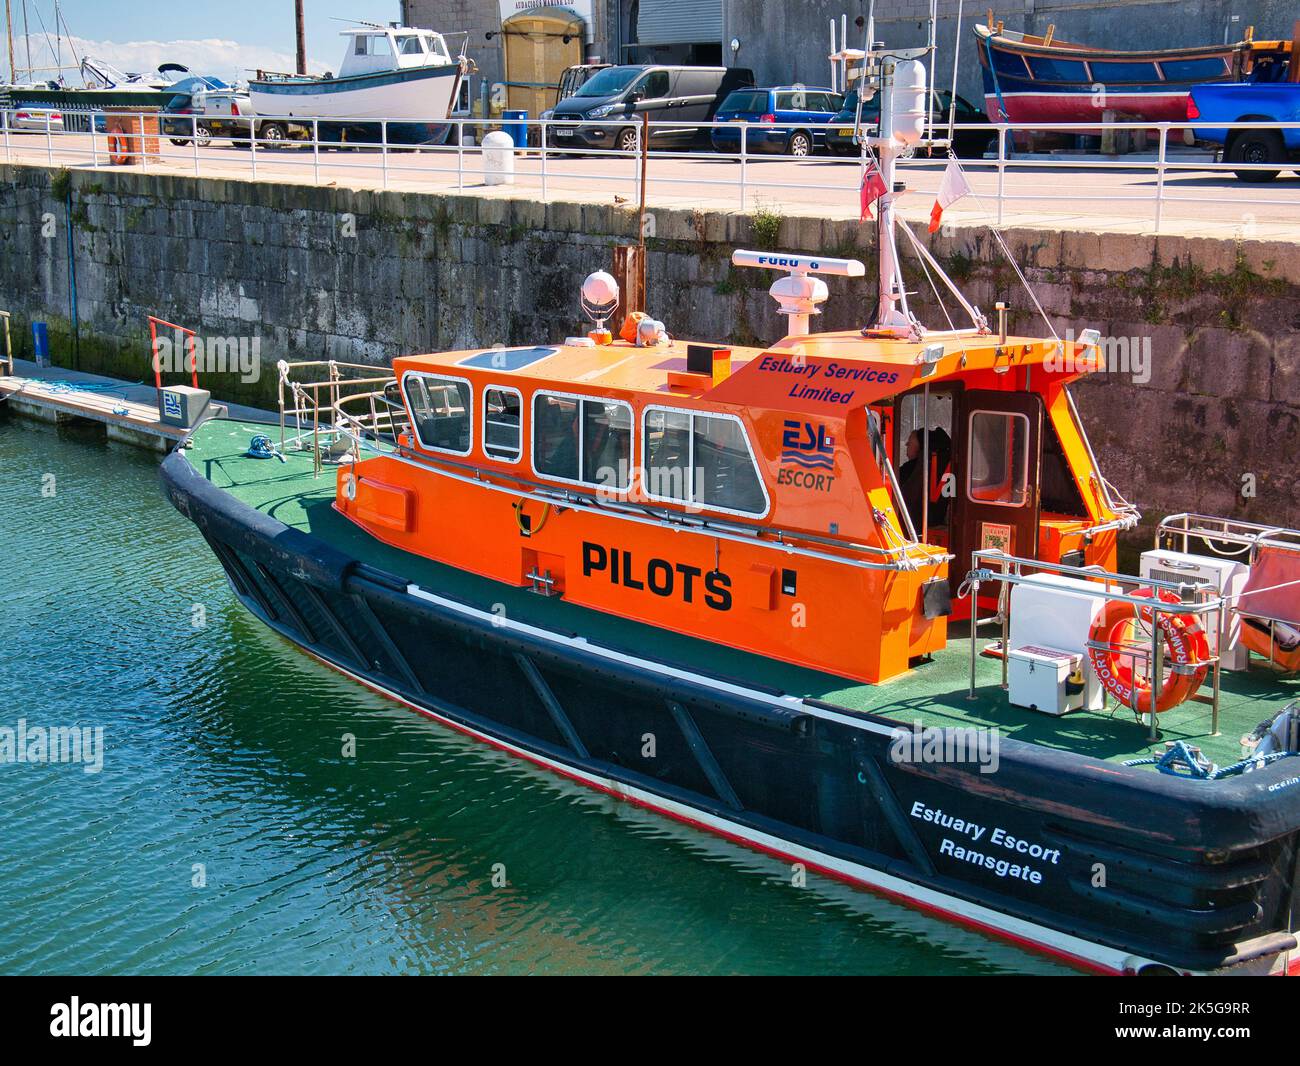 The Ramsgate Royal Harbour pilot services boat Estuary Escort, featuring  bright orange superstructure and a green deck. Stock Photo